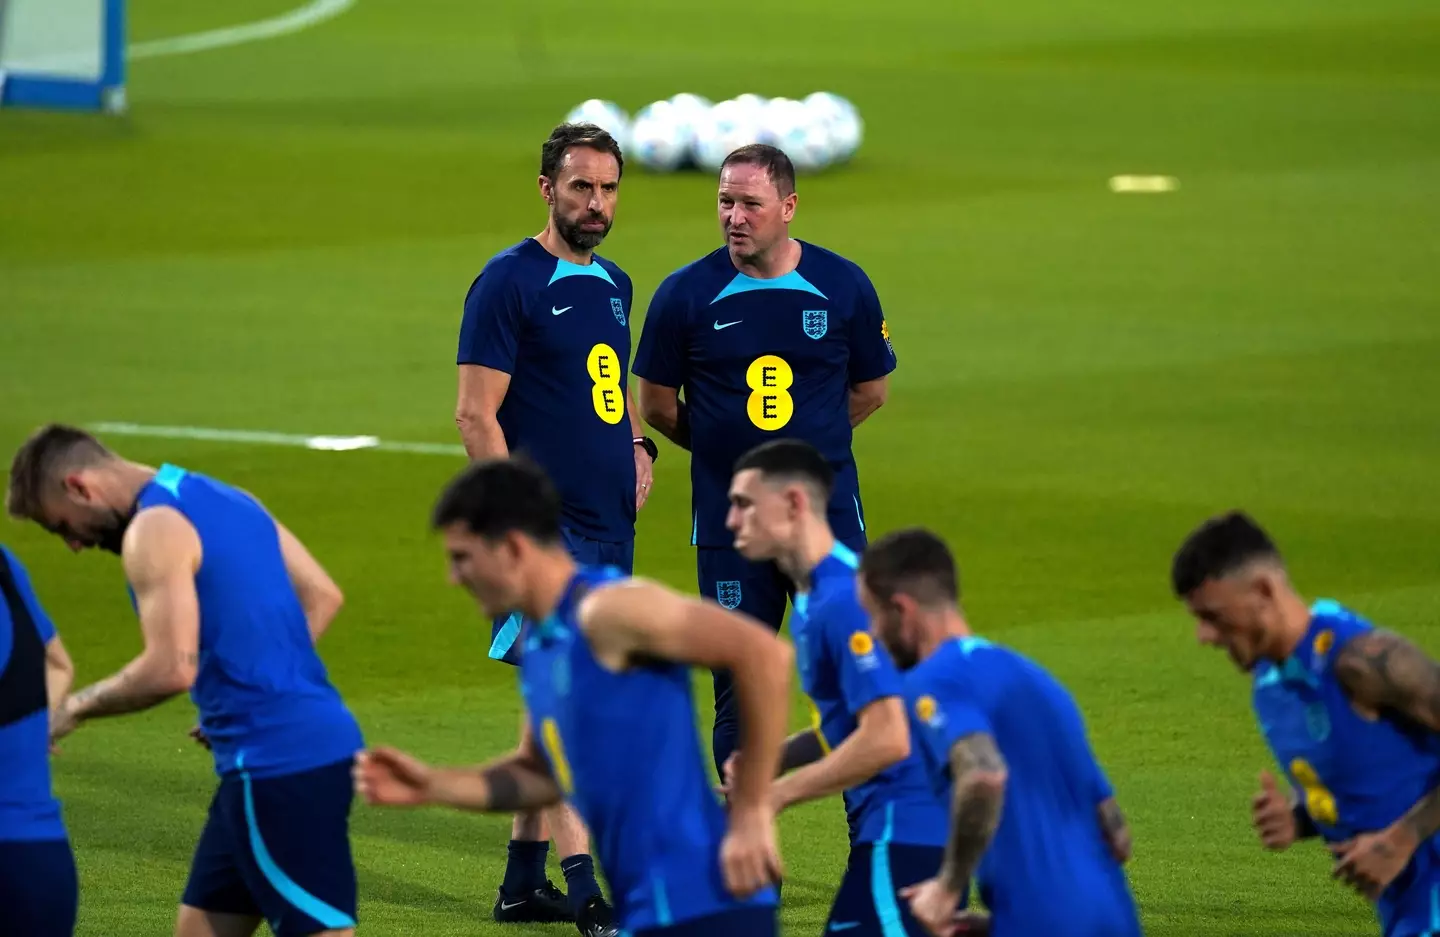 Southgate watches England player train in Qatar. (Image